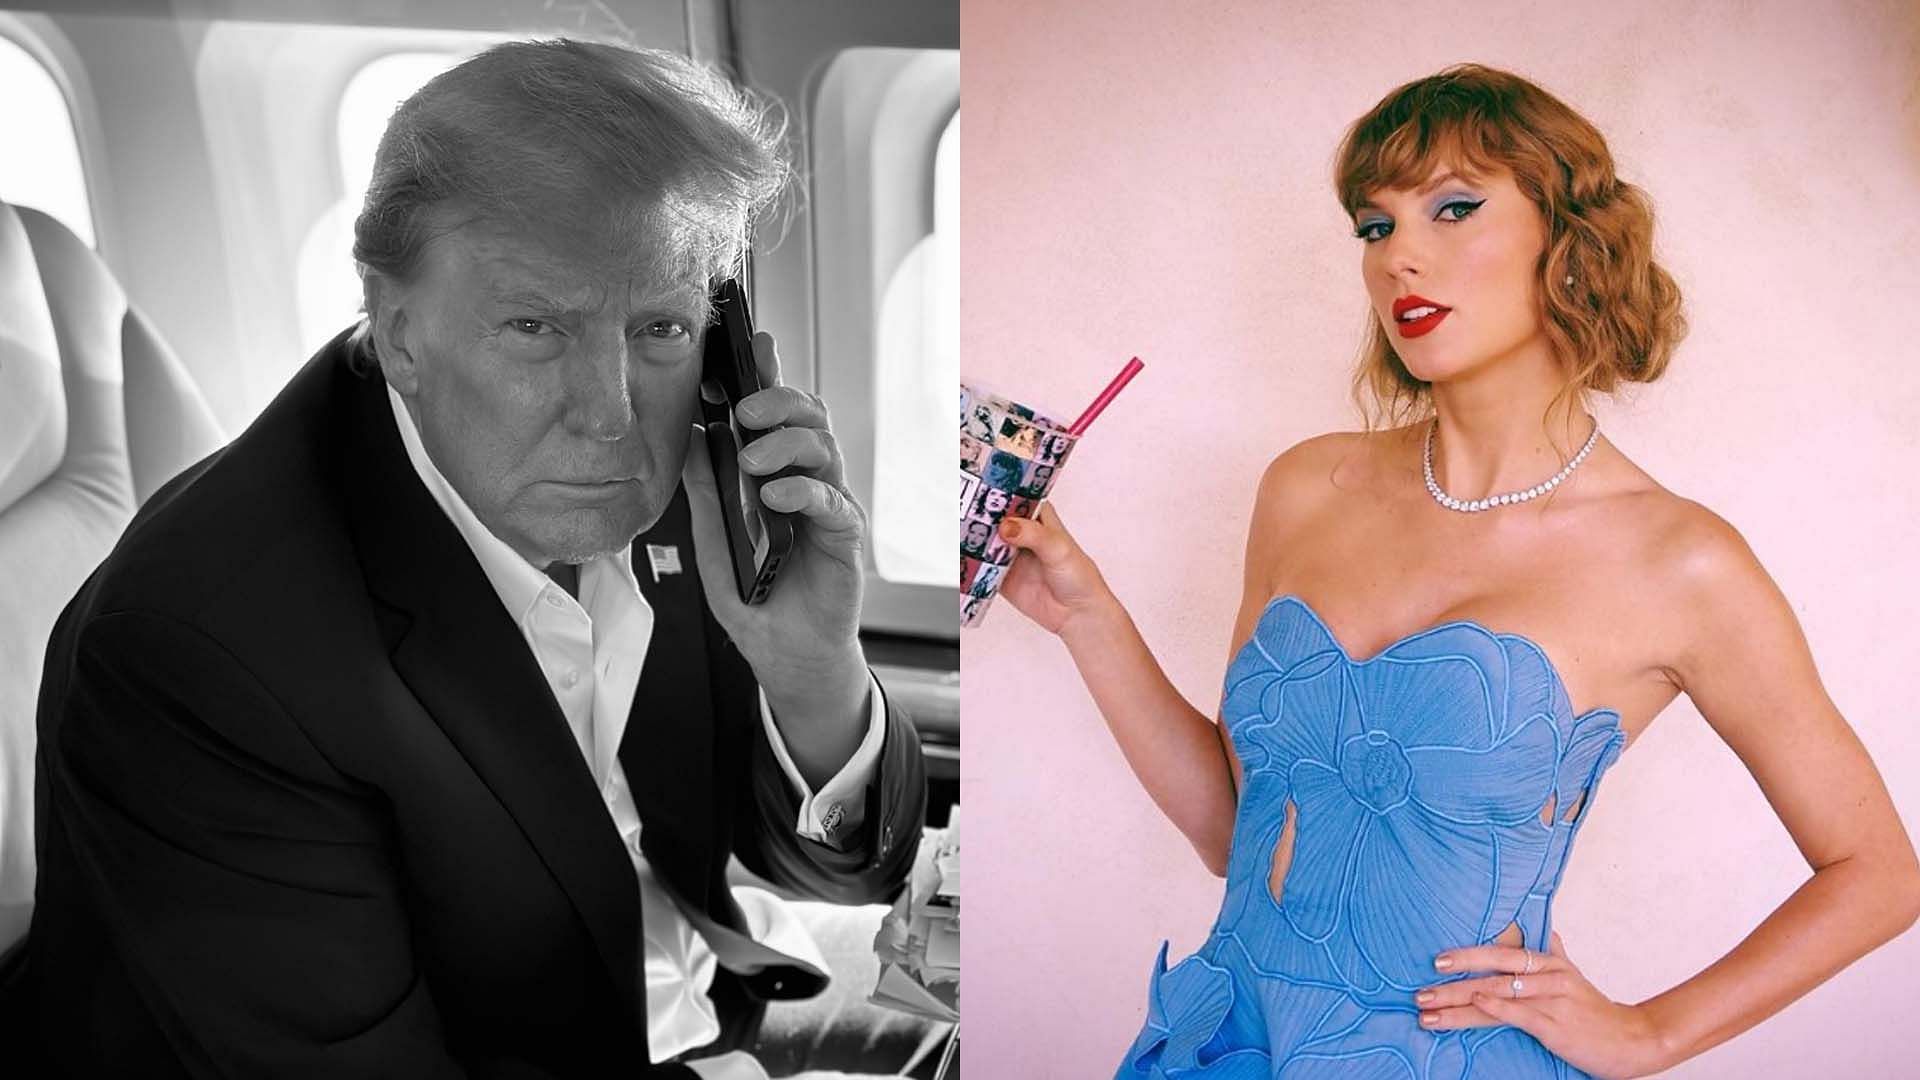 Internet trills Donald Trump after Truth Social post about Taylor Swift (Image via Instagram/ @realdonaldtrump, @taylorswuft)